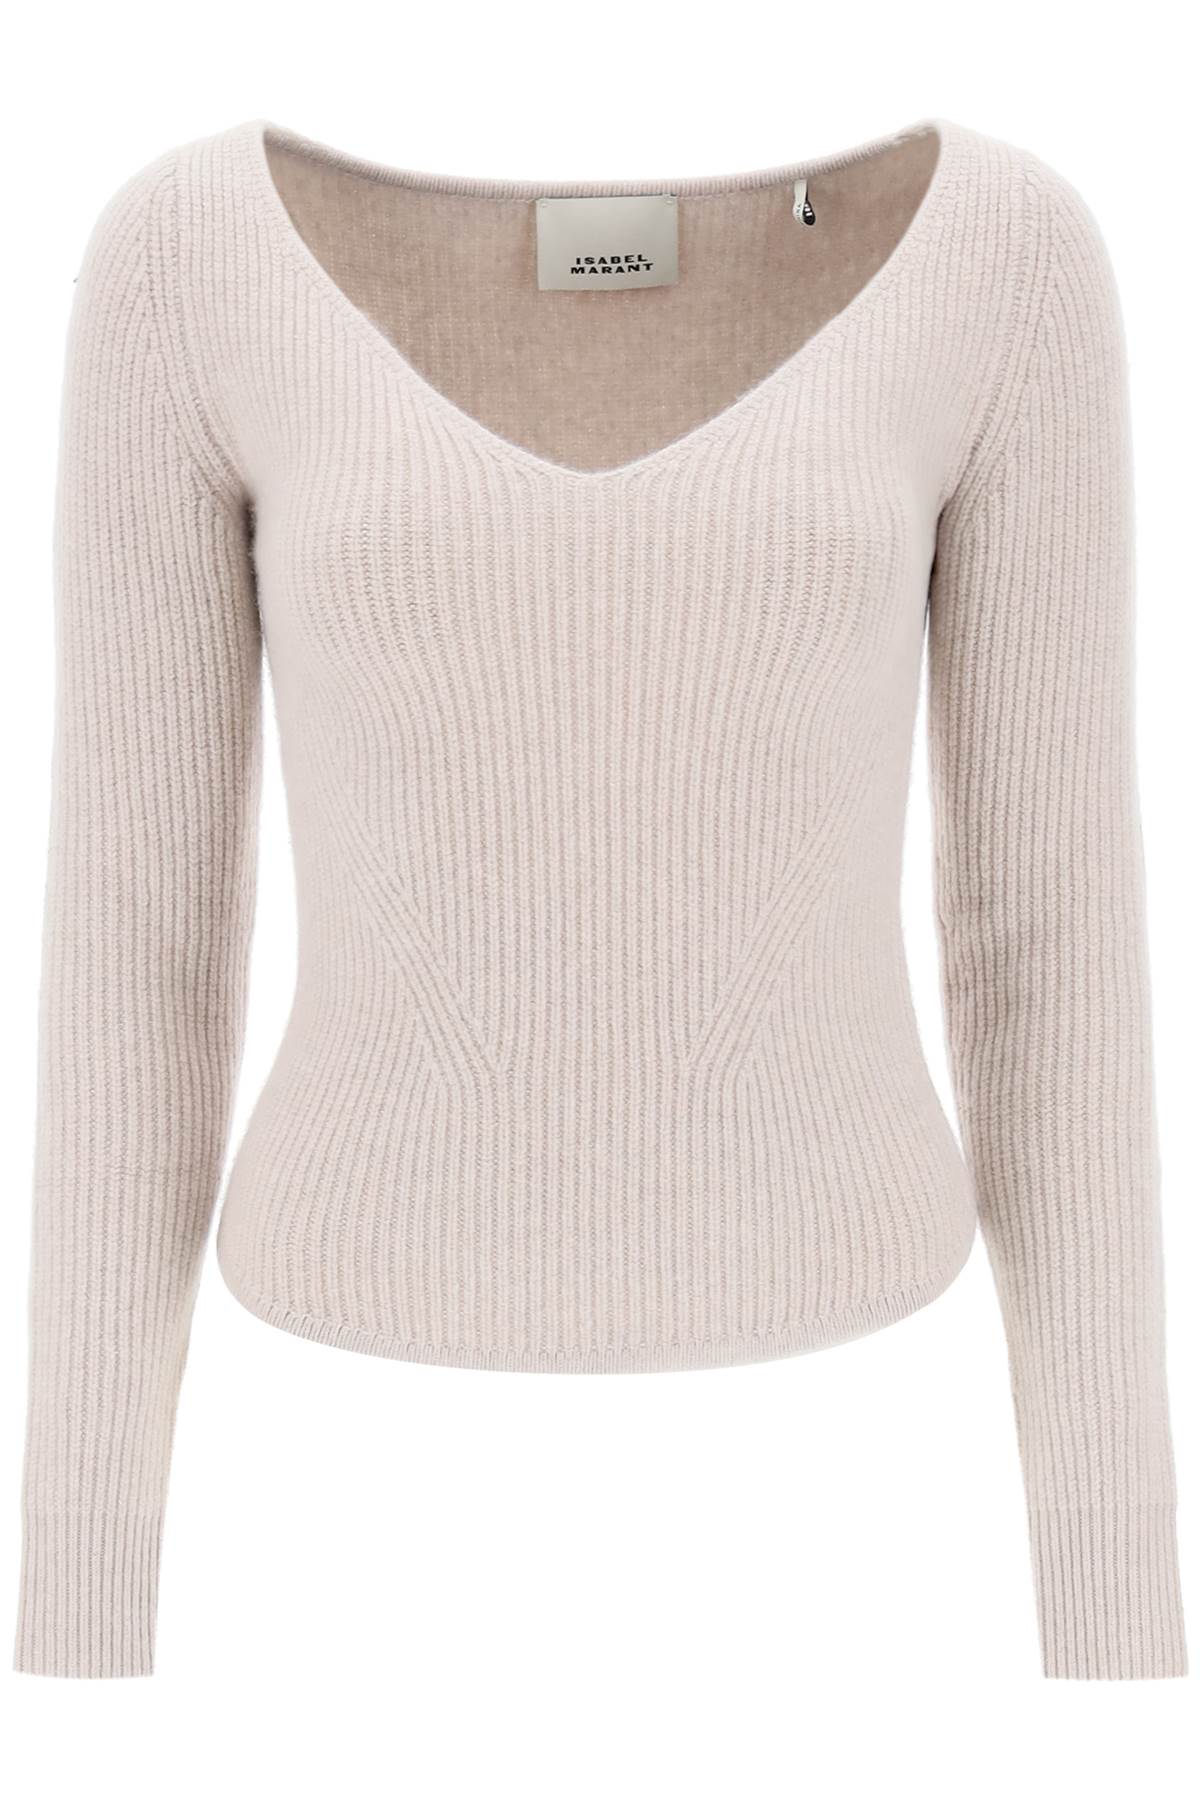 ISABEL MARANT Women's Asymmetrical Wool and Cashmere Sweater - Beige